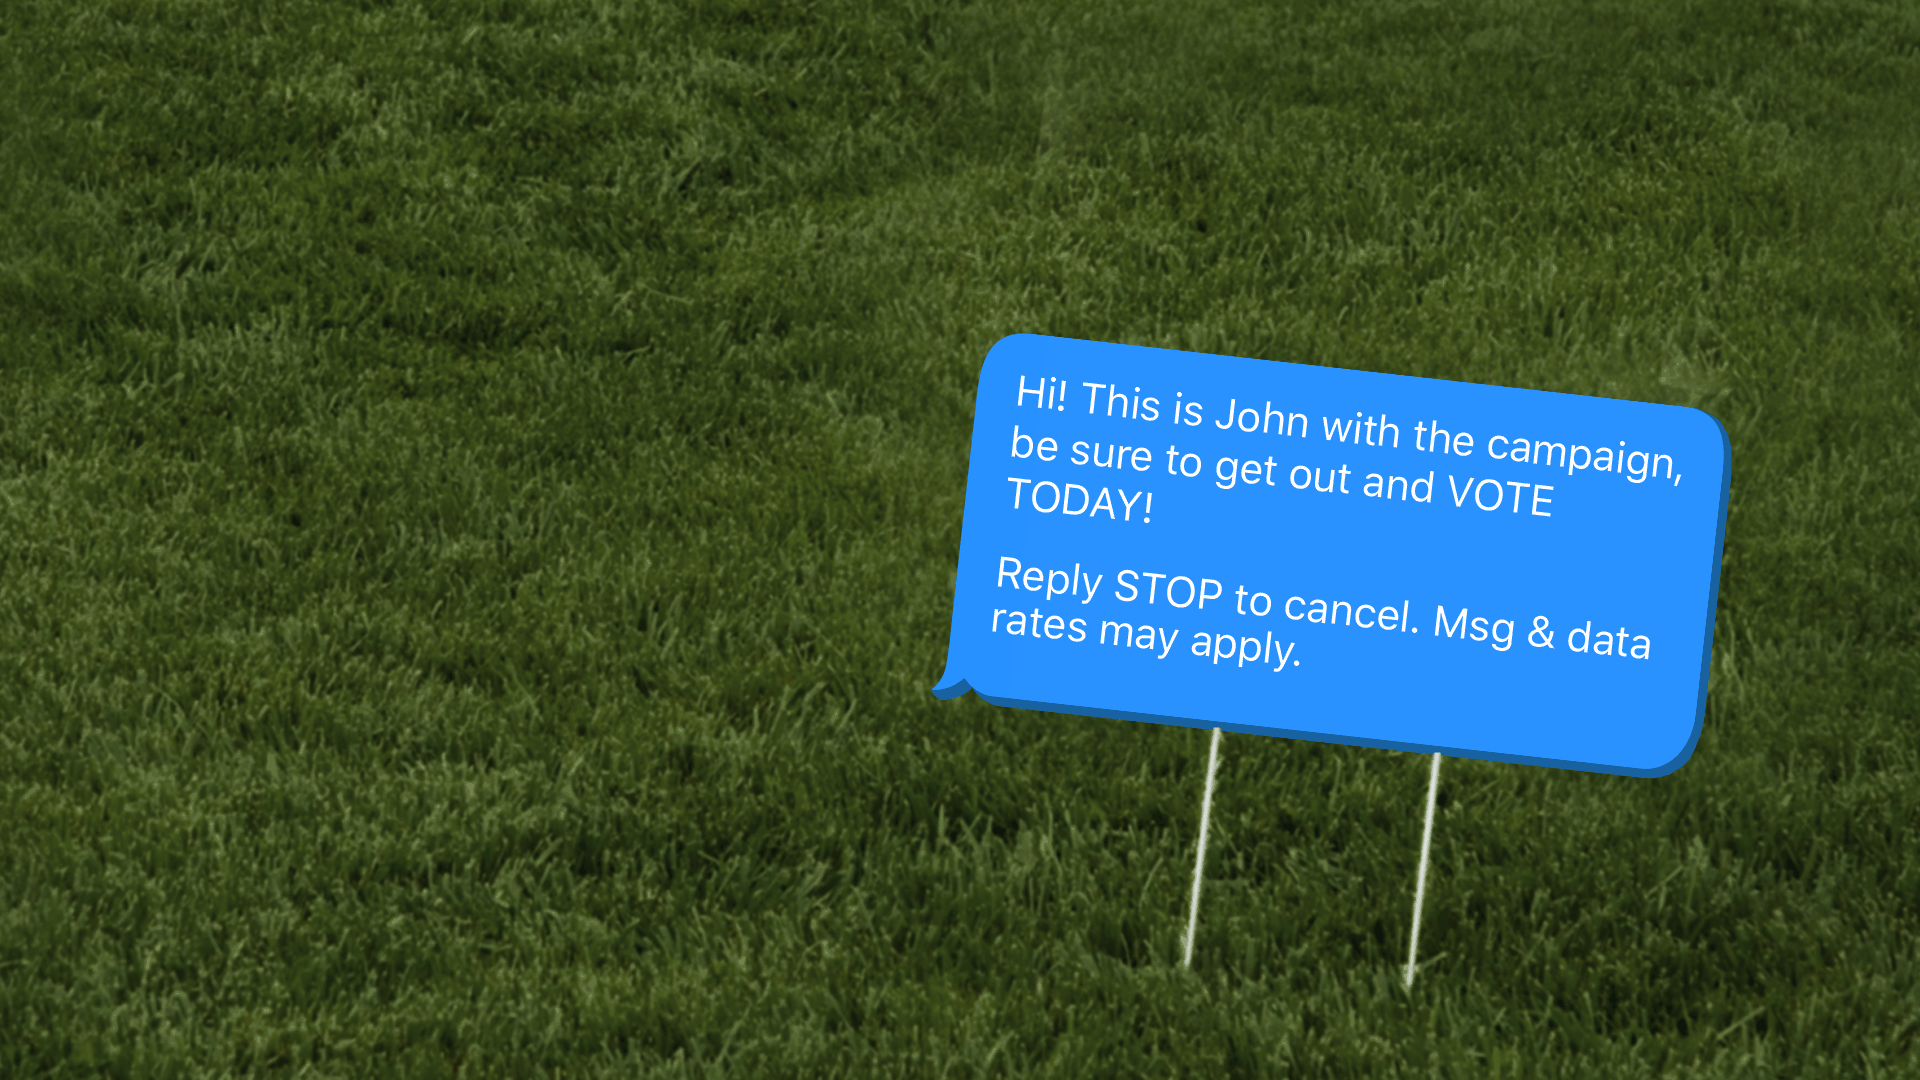 A text message as a political lawn sign